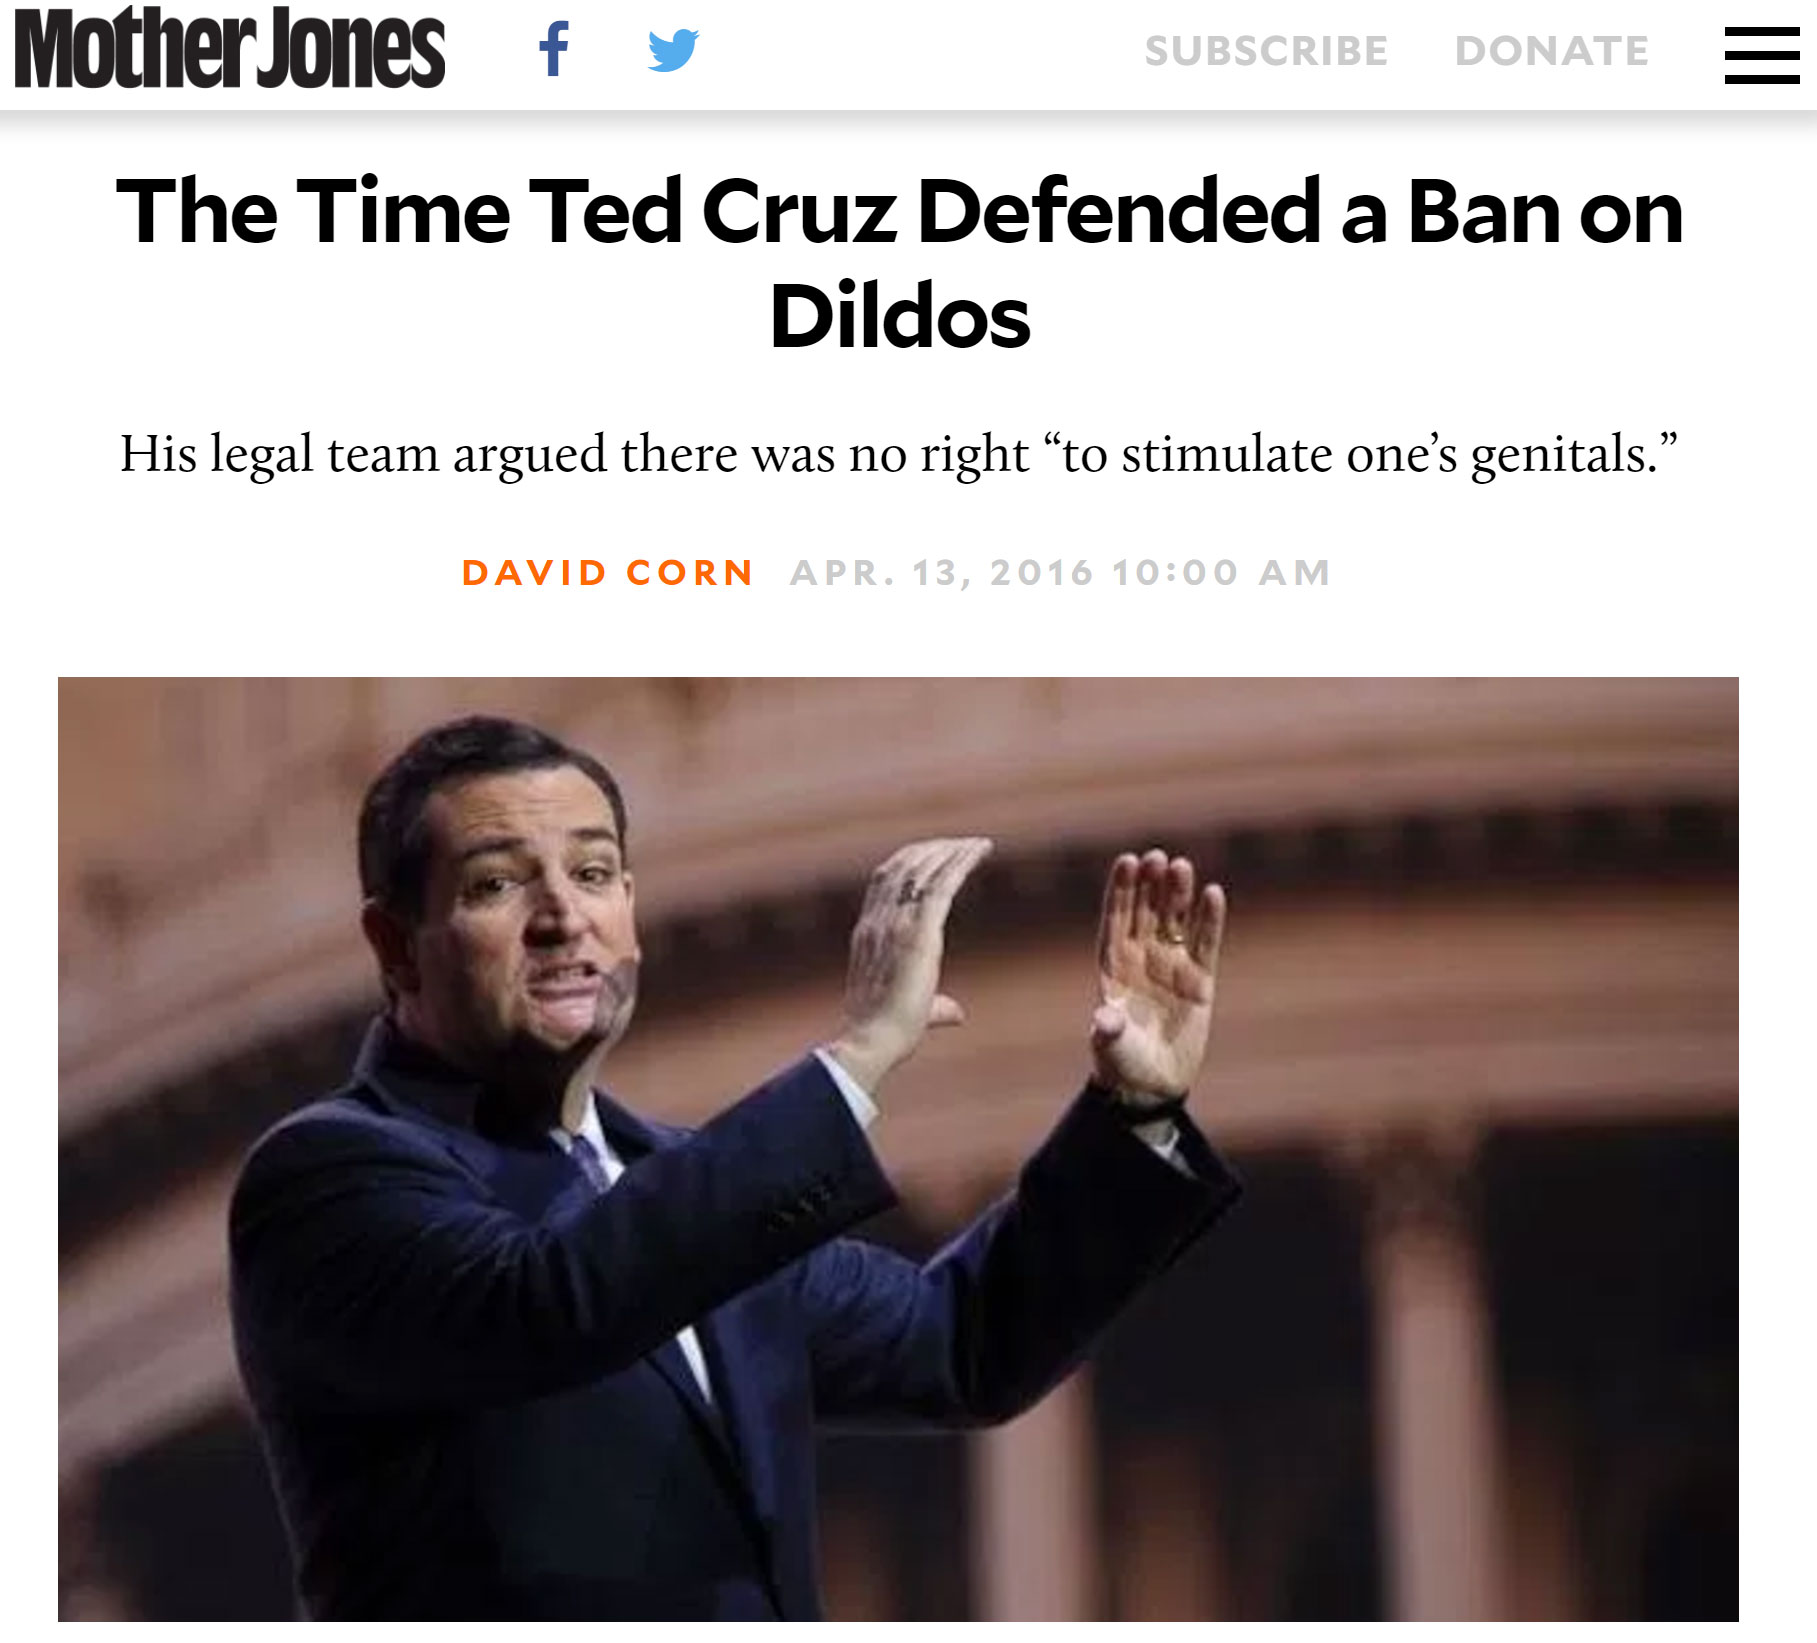 3-The-Time-Ted-Cruz-Defended-a-Ban-on-Dildos.jpg